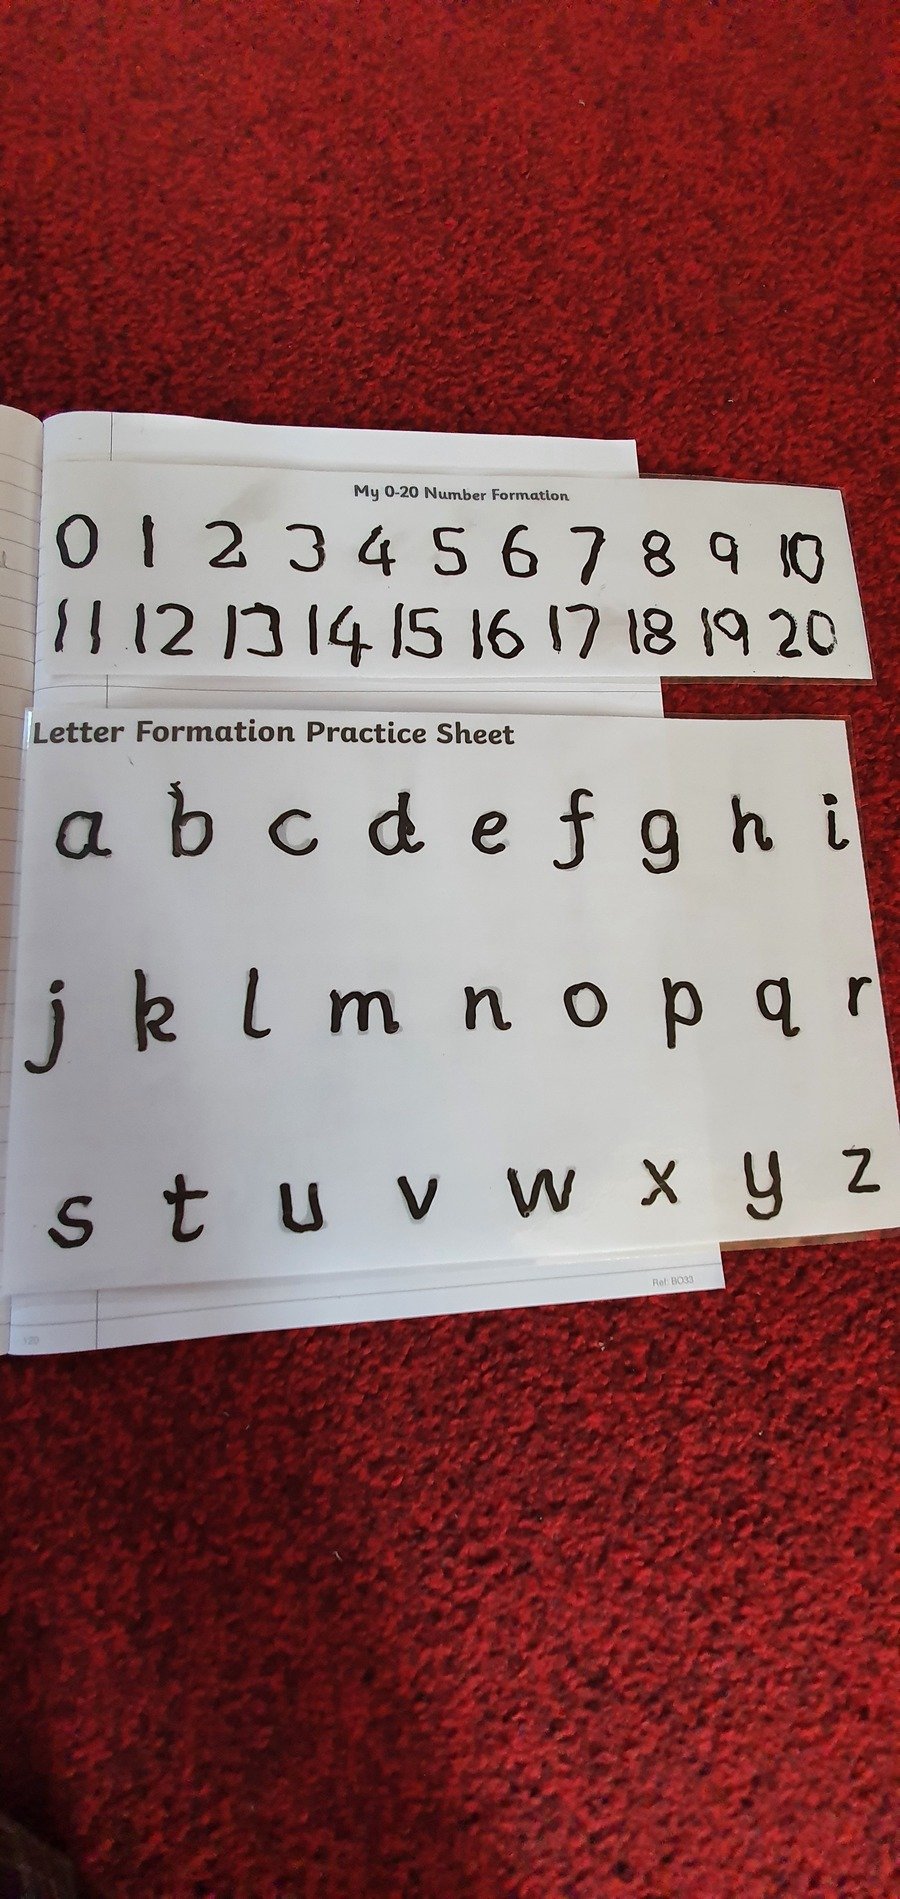 Saima had a go at forming numbers and letters, well done Saima!